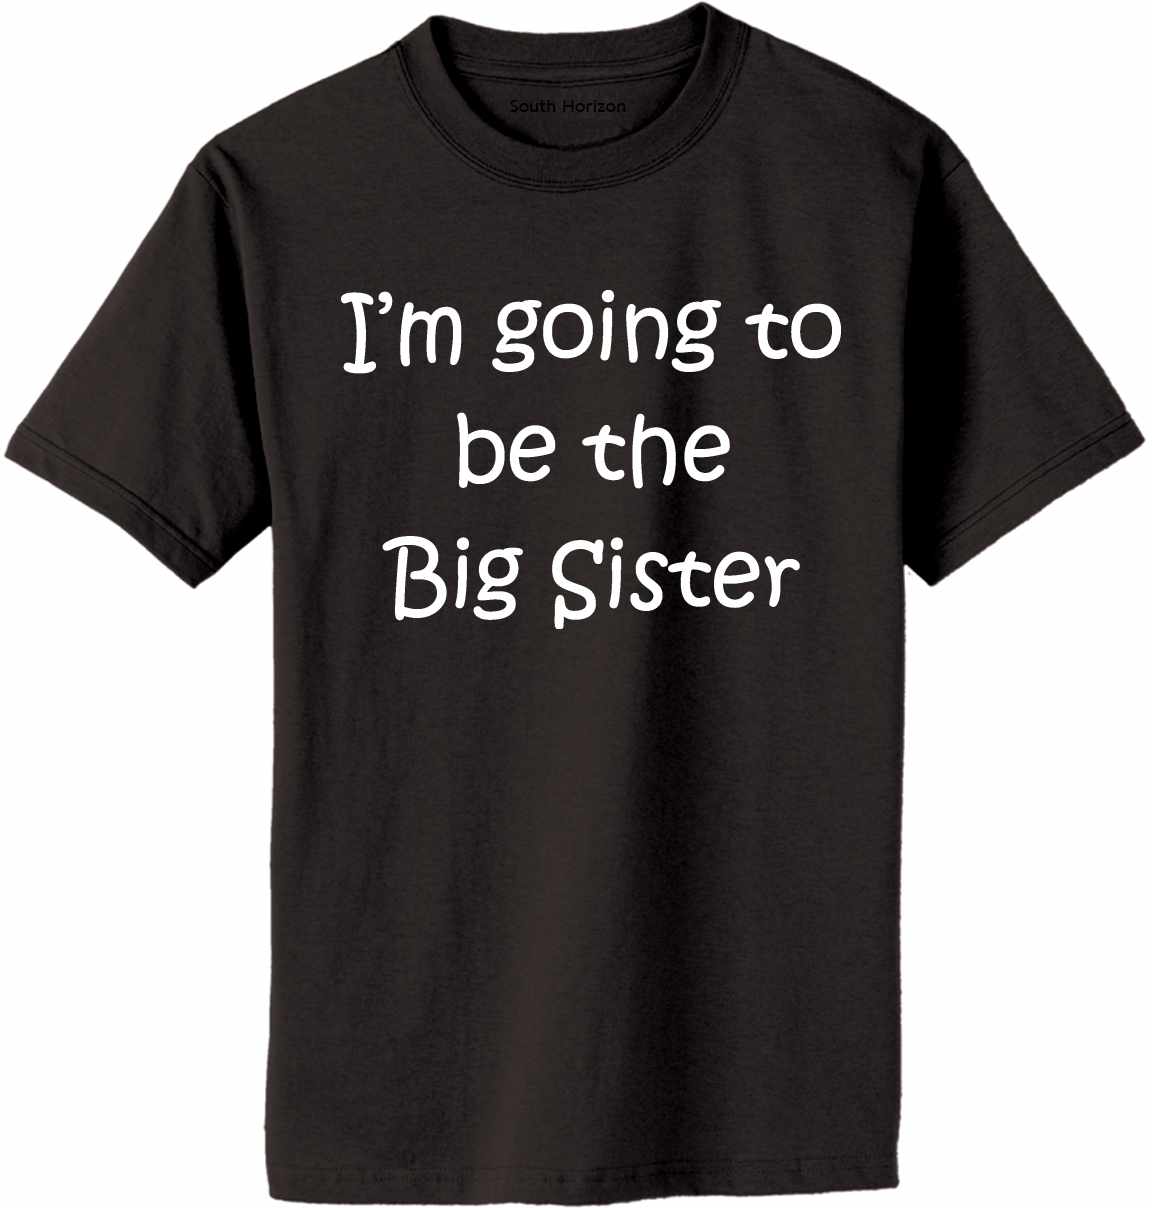 I'M GOING TO BE THE BIG SISTER Adult T-Shirt